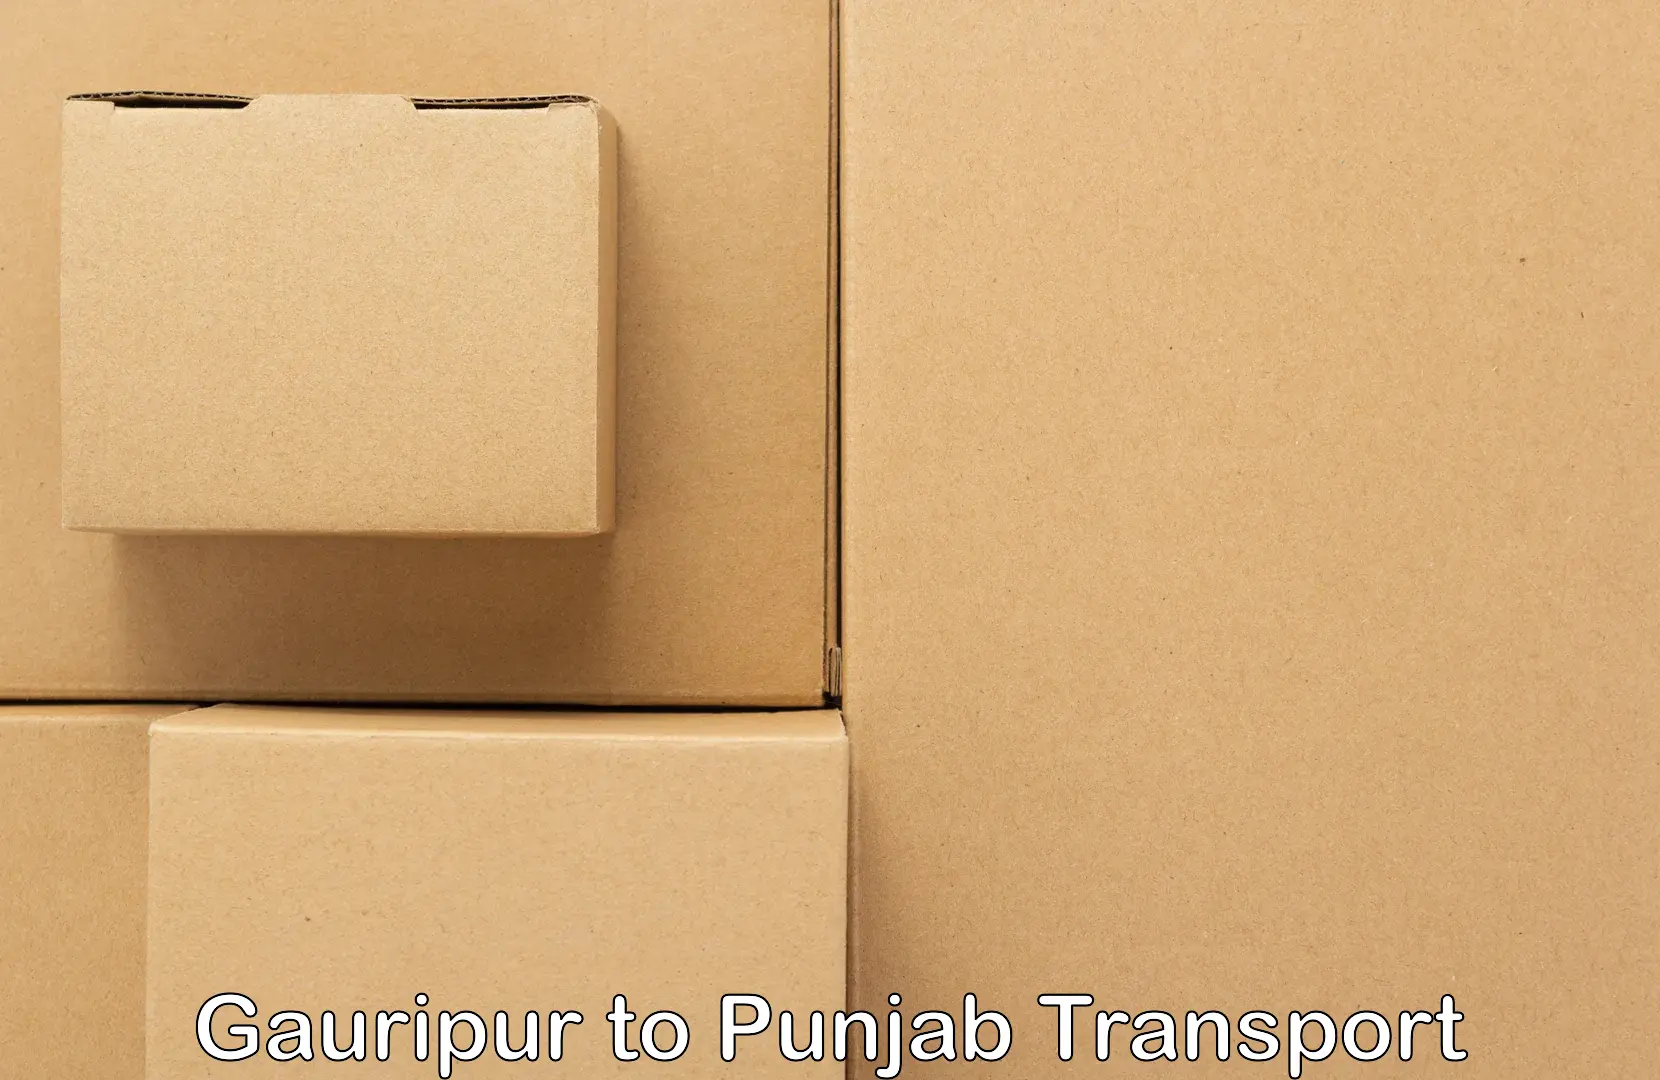 Two wheeler parcel service Gauripur to Sultanpur Lodhi